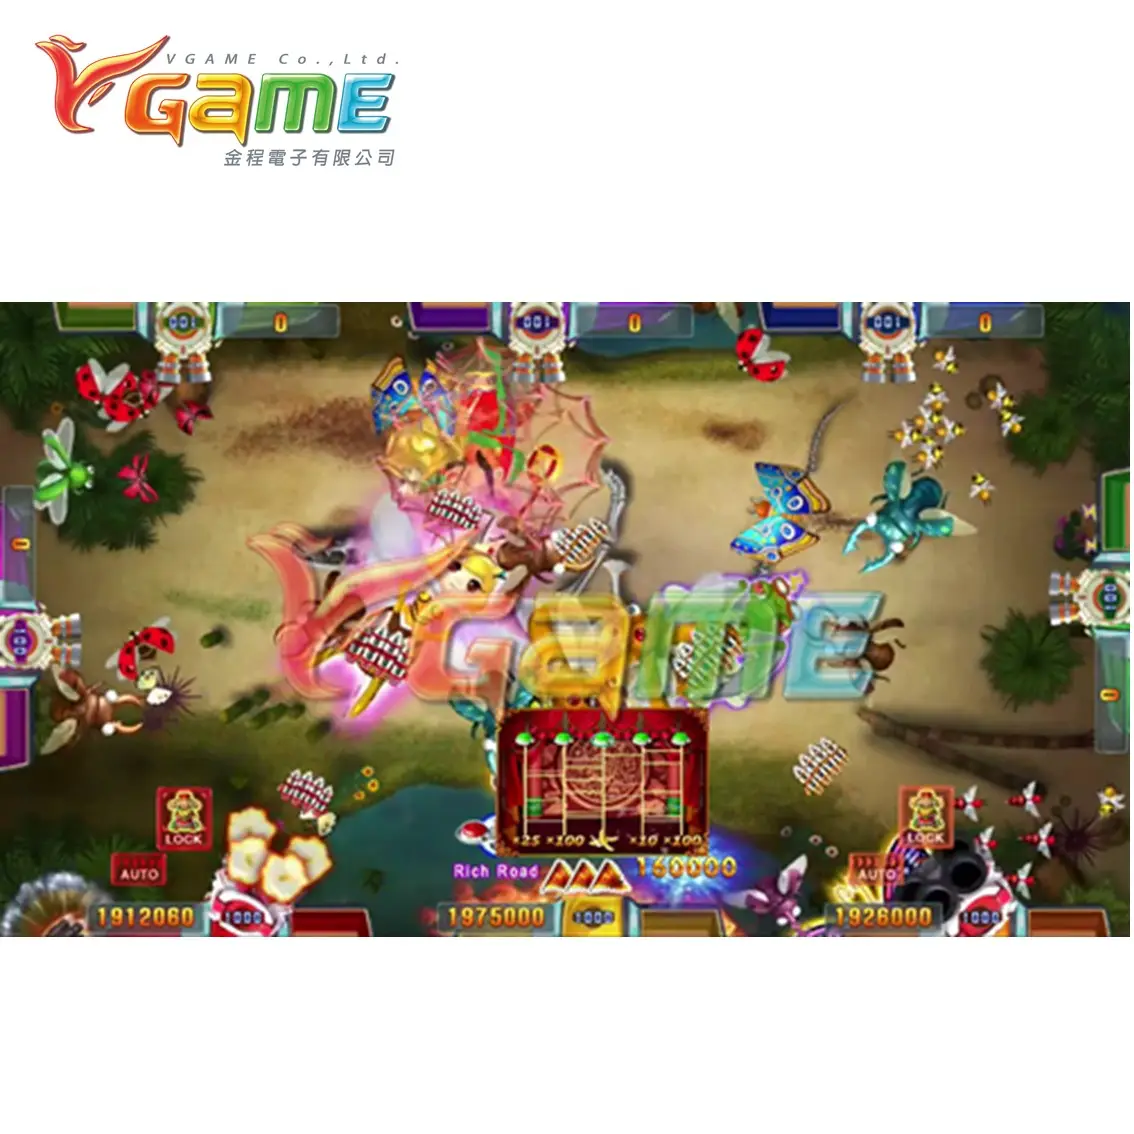 Hot Sale - Insect Monster - Fish Game Board - Vgame Insect Series - For Aracade Game Room Sweepstakes Amusement Coin Operated